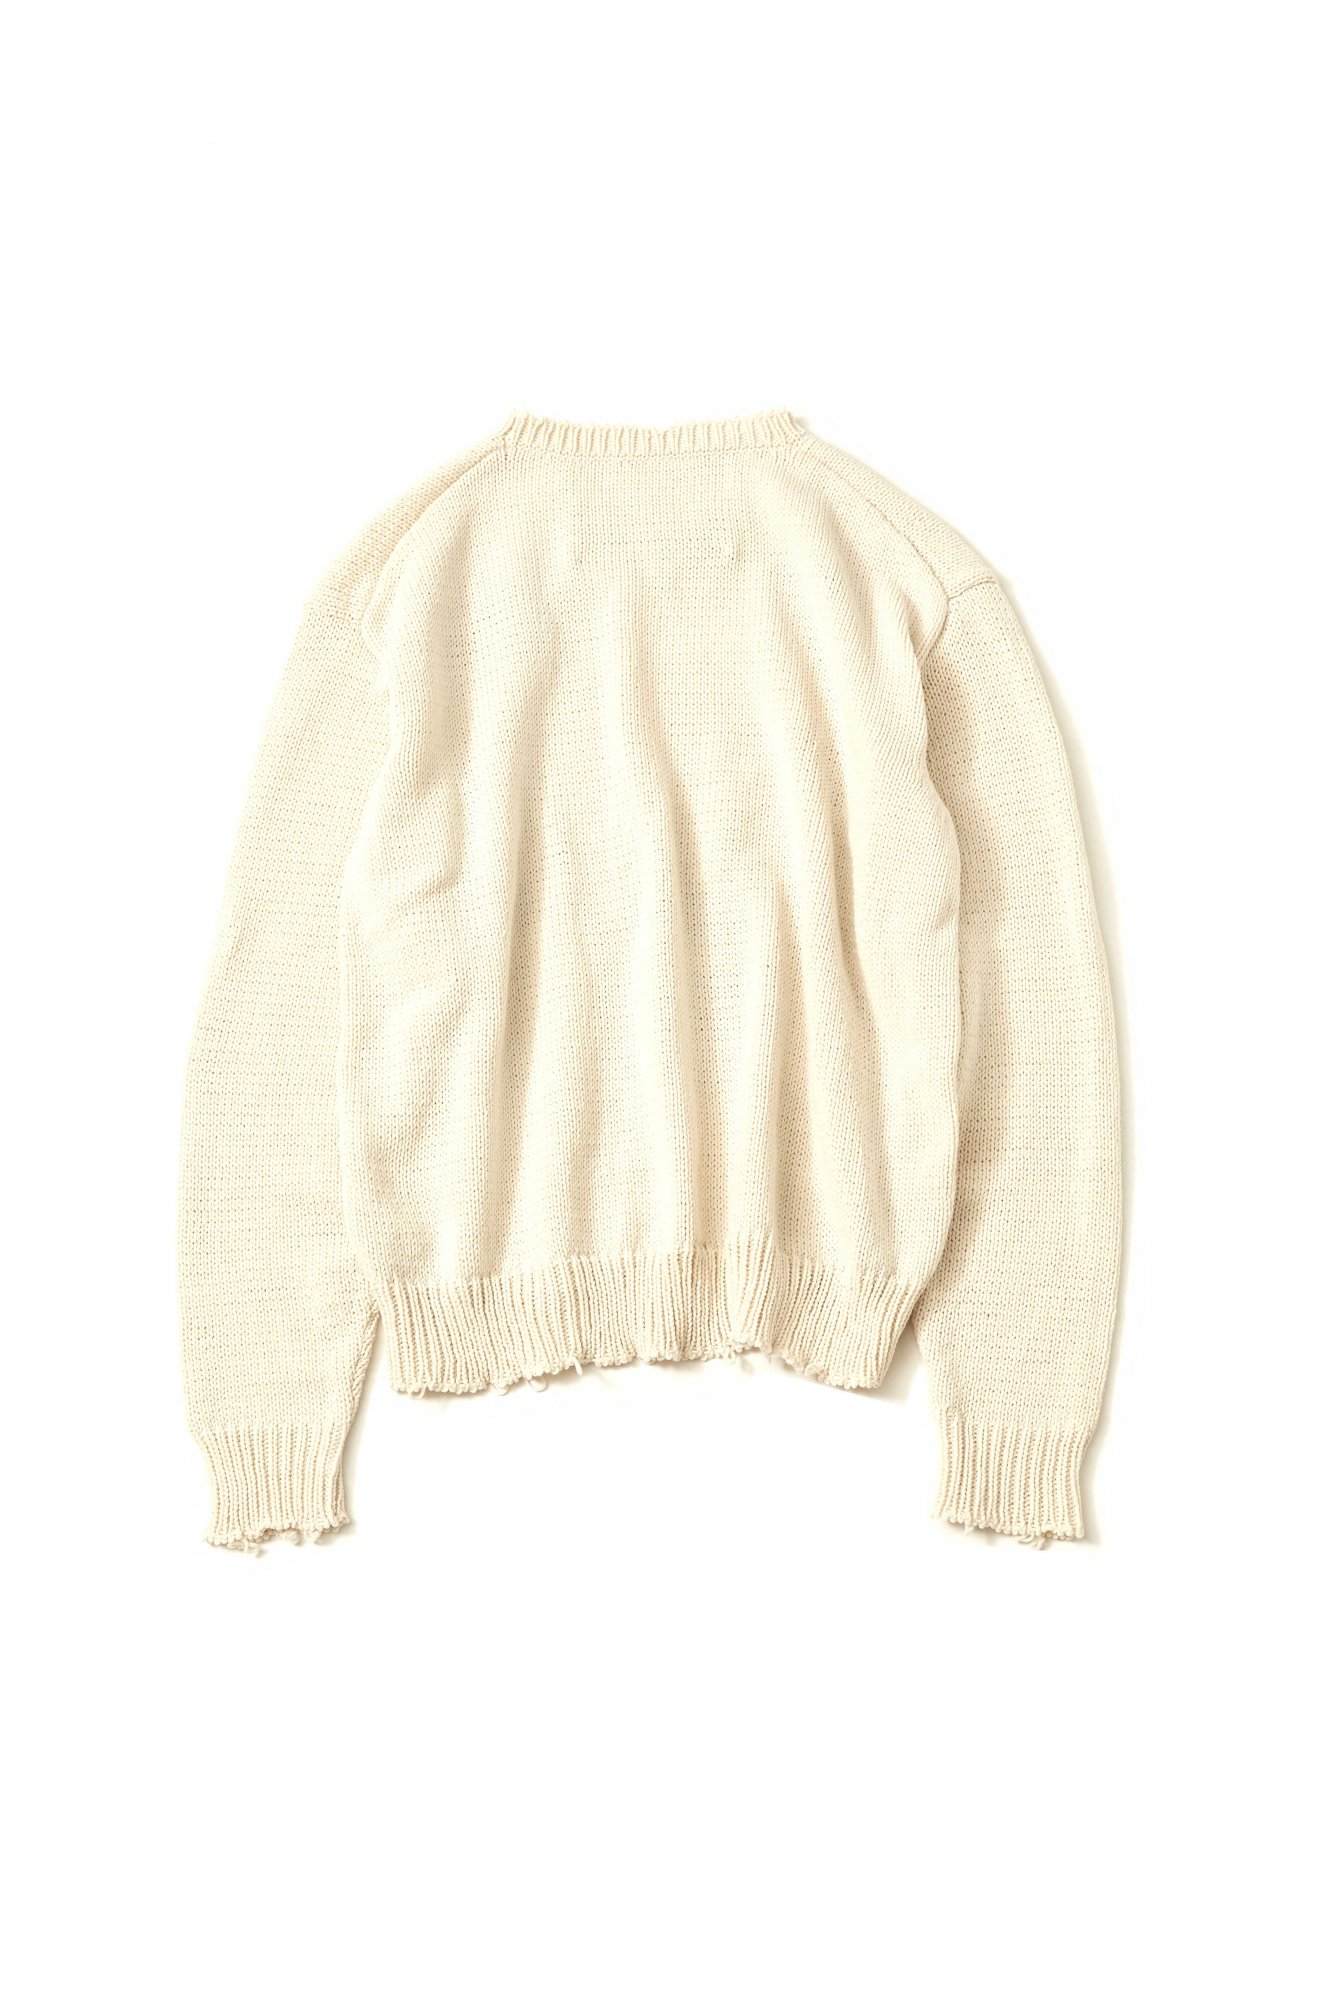 soe<br />Intarsia Sweater Memphis / OFF WHITE<img class='new_mark_img2' src='https://img.shop-pro.jp/img/new/icons14.gif' style='border:none;display:inline;margin:0px;padding:0px;width:auto;' />